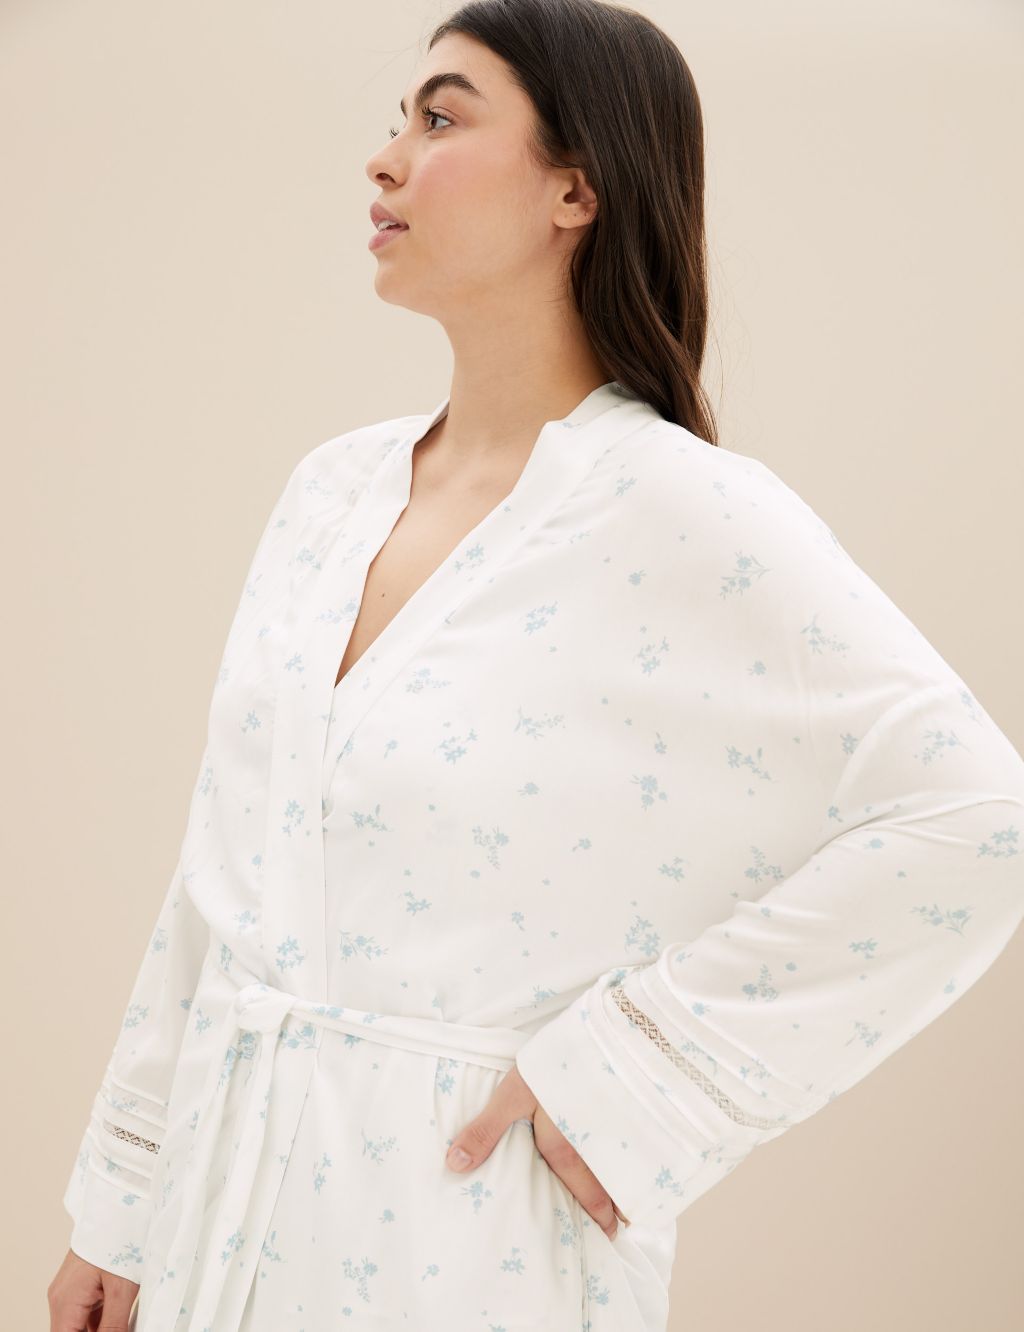 Floral Lace Insert Long Dressing Gown image 3